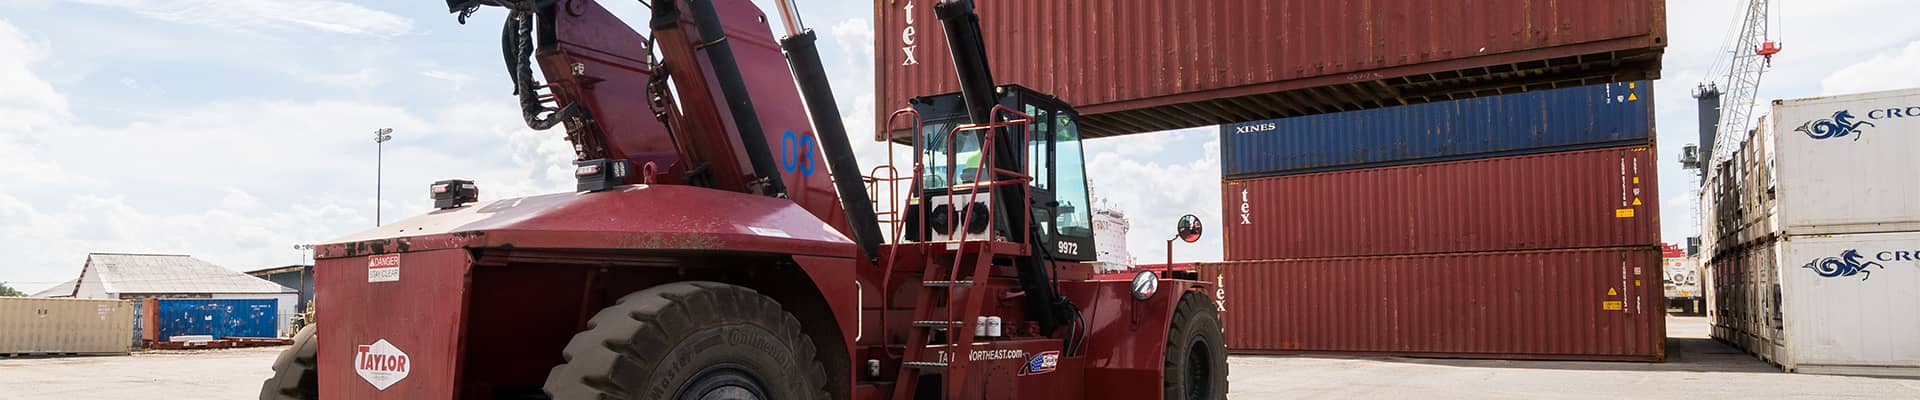 Konecranes reach truck moving containers in a port